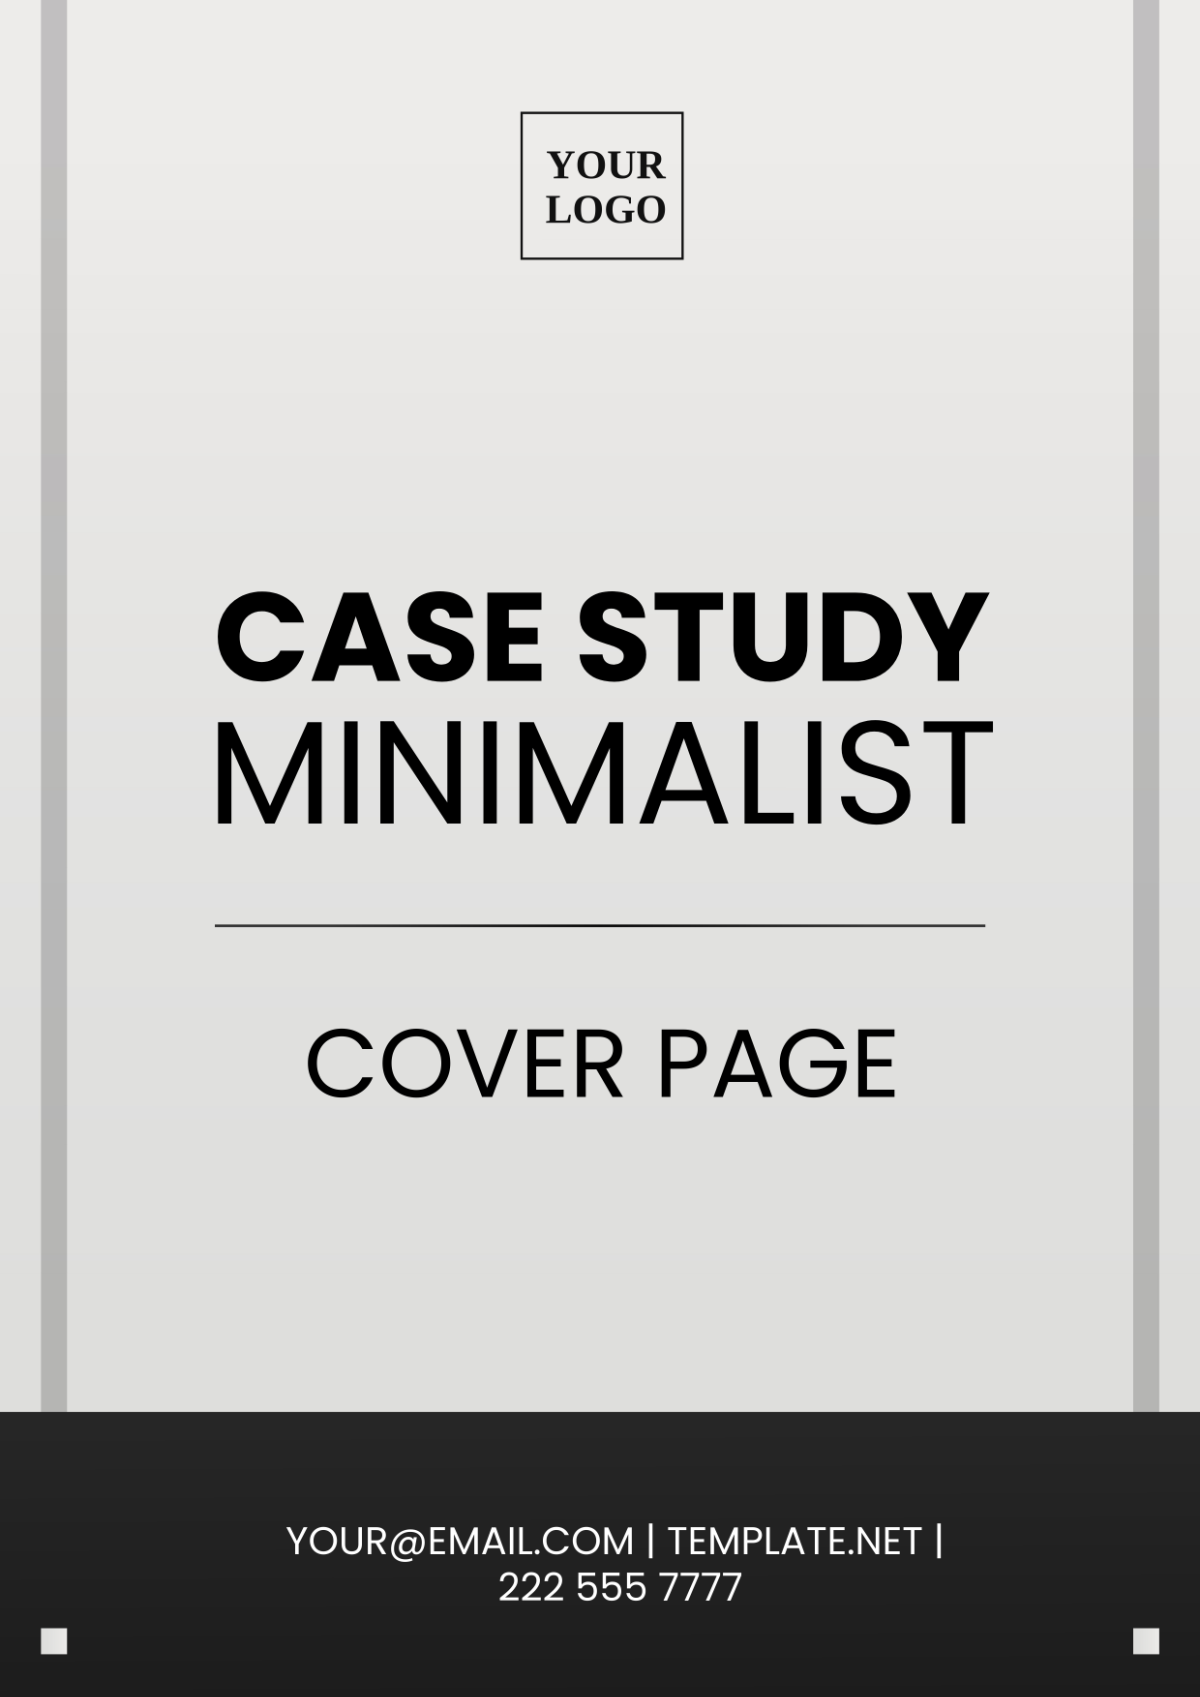 Case Study Minimalist Cover Page Template